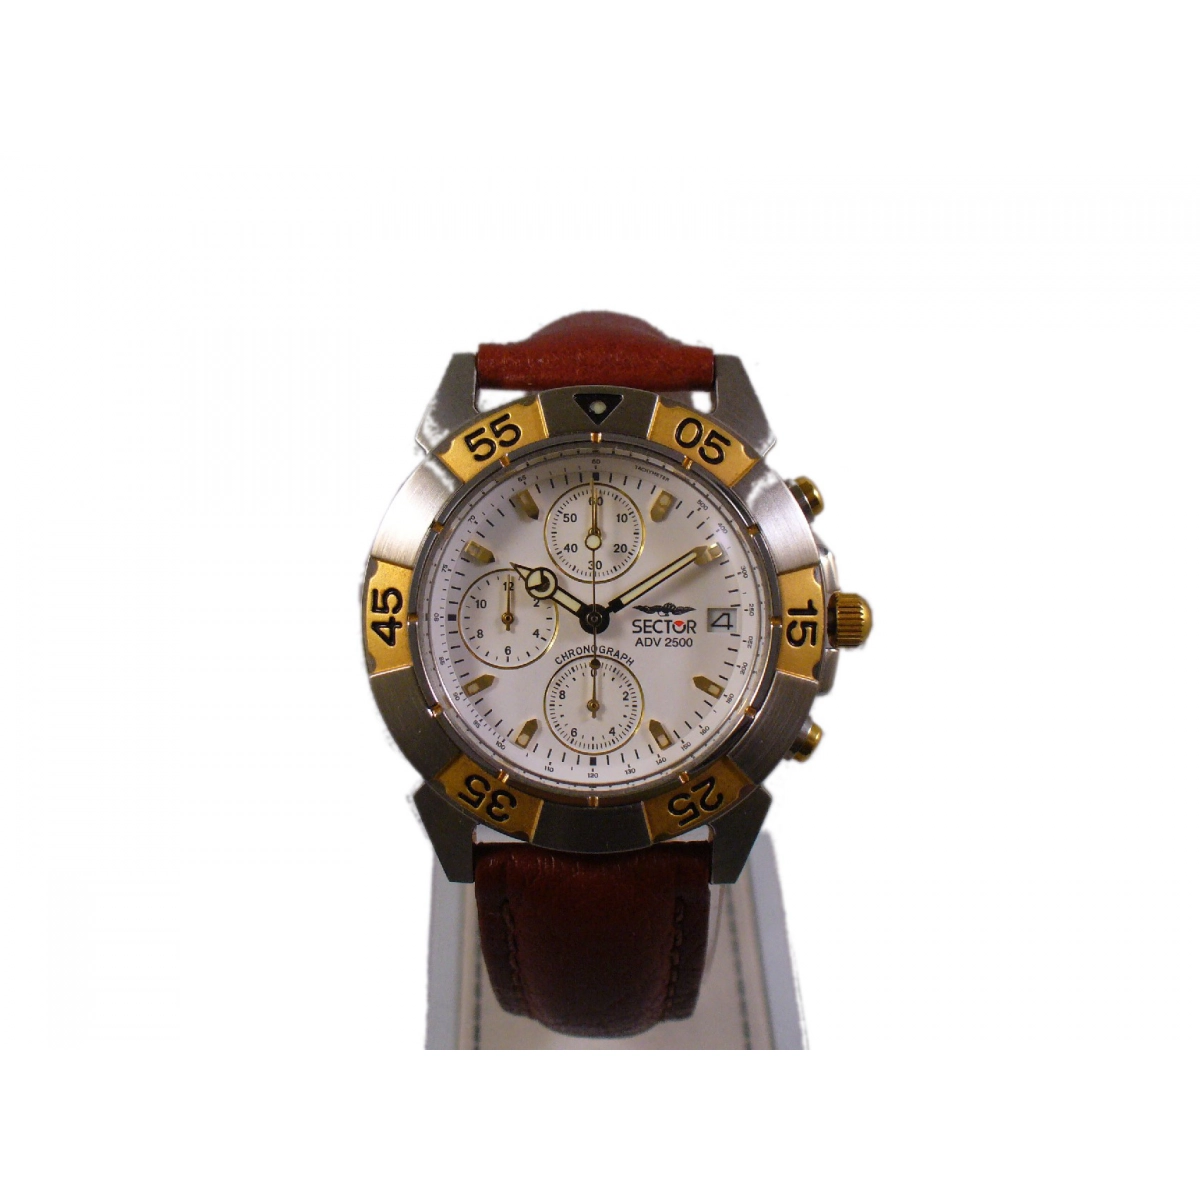 SECTOR CHRONOGRAPH TWO-TONE LEATHER 1851941027 WATCH